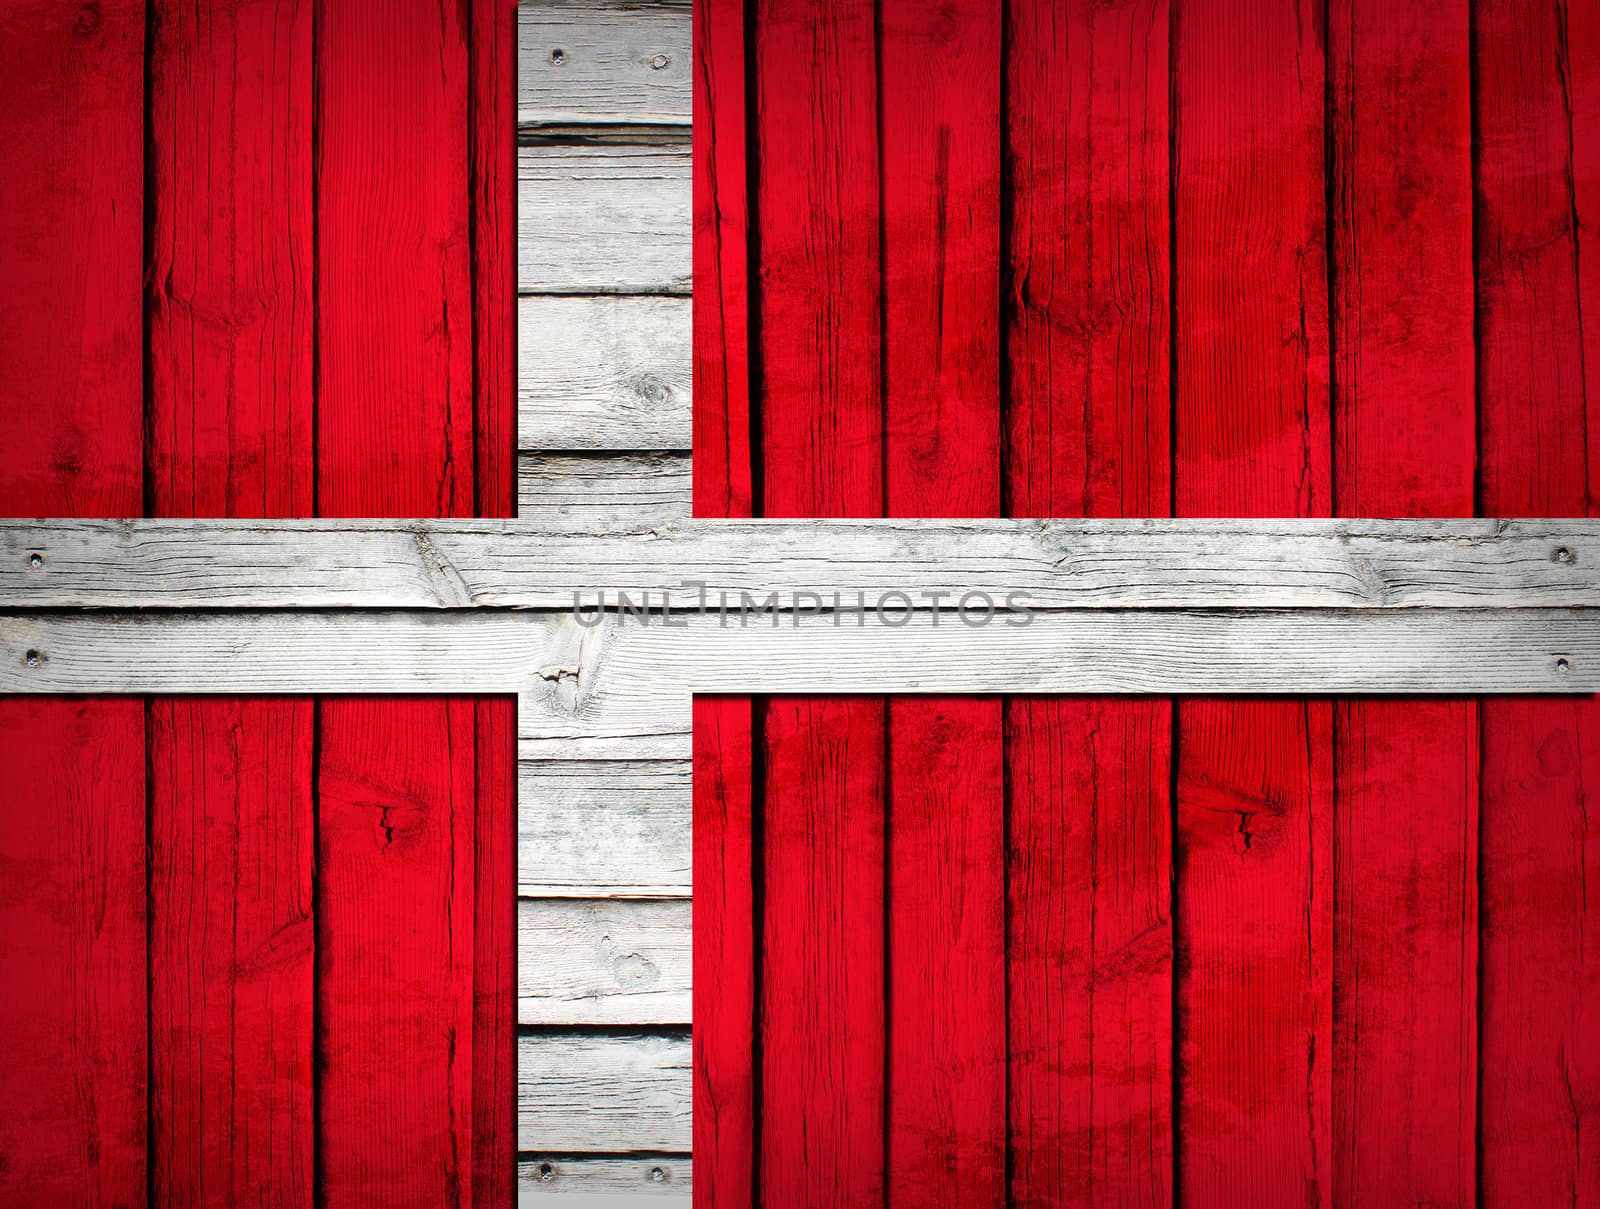 Danish flag painted on wooden boards. Grunge style